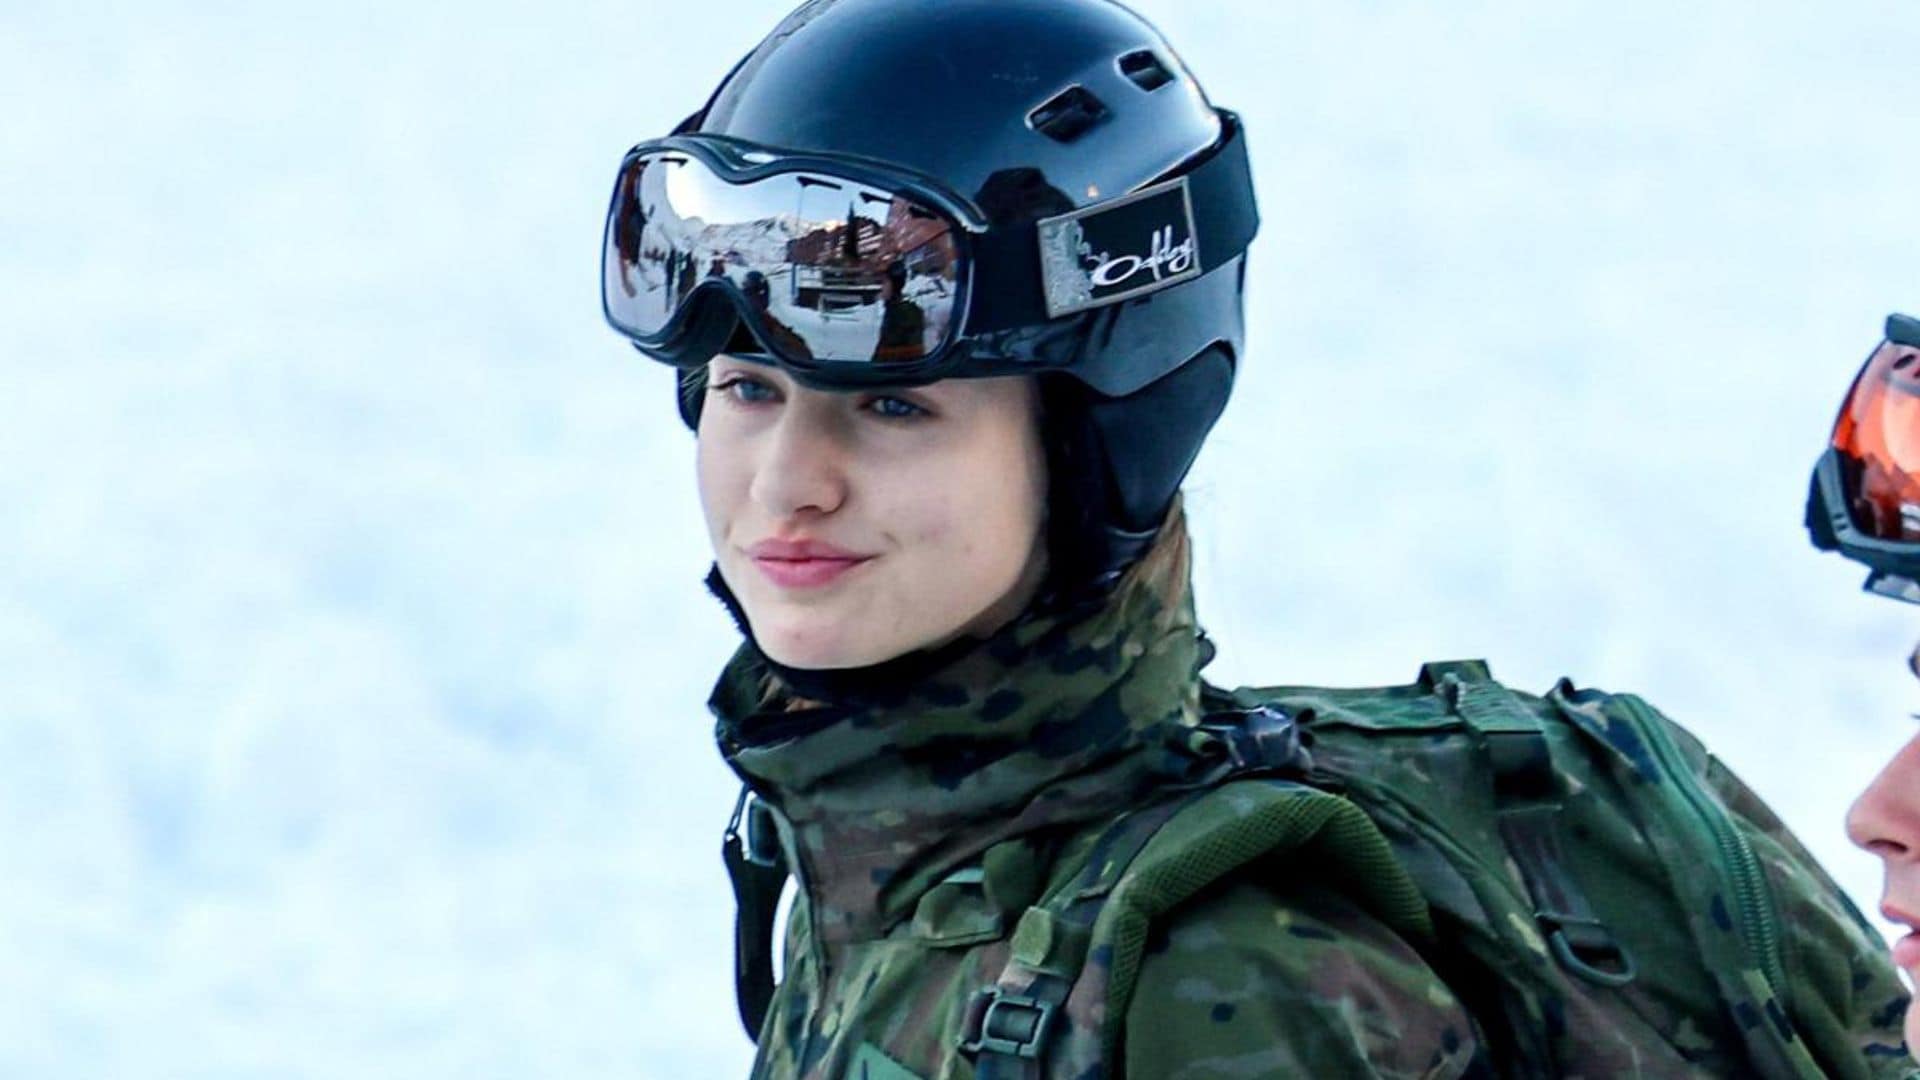 Princess Leonor hits the slopes during military training ahead of Christmas: Photos